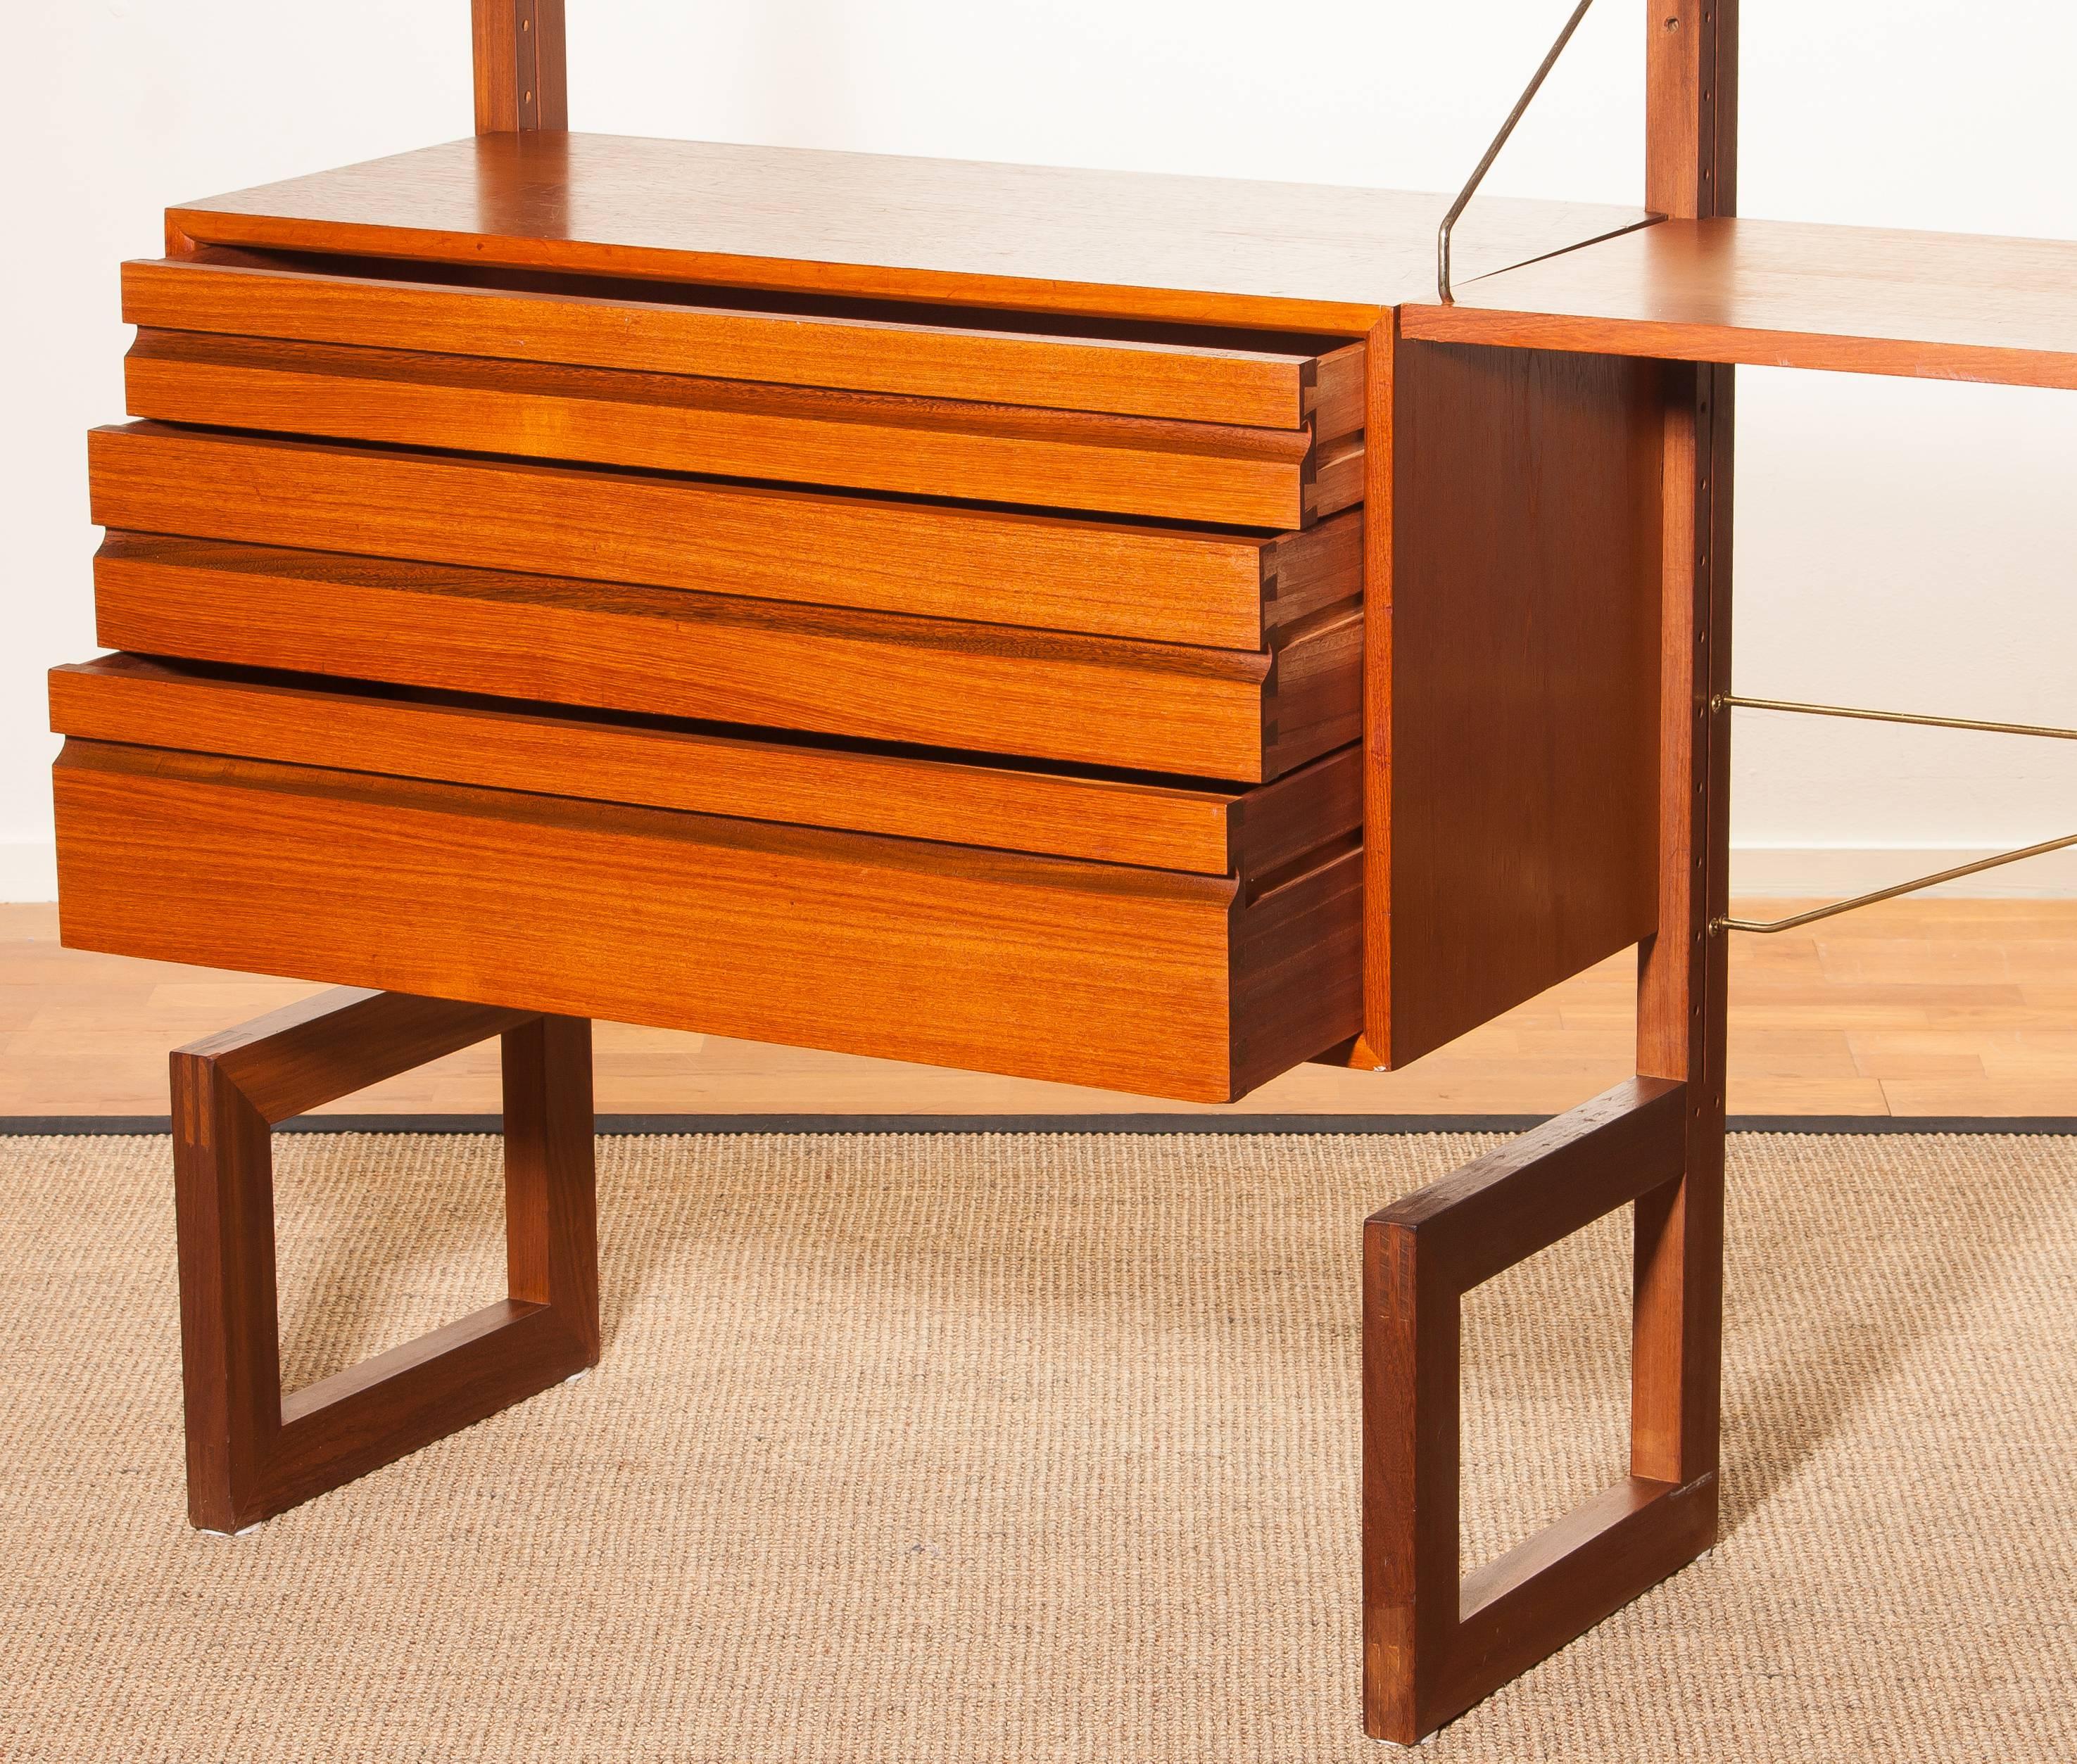 1960s, Teak Wall System Unit by Poul Cadovius for Cado, Denmark 1